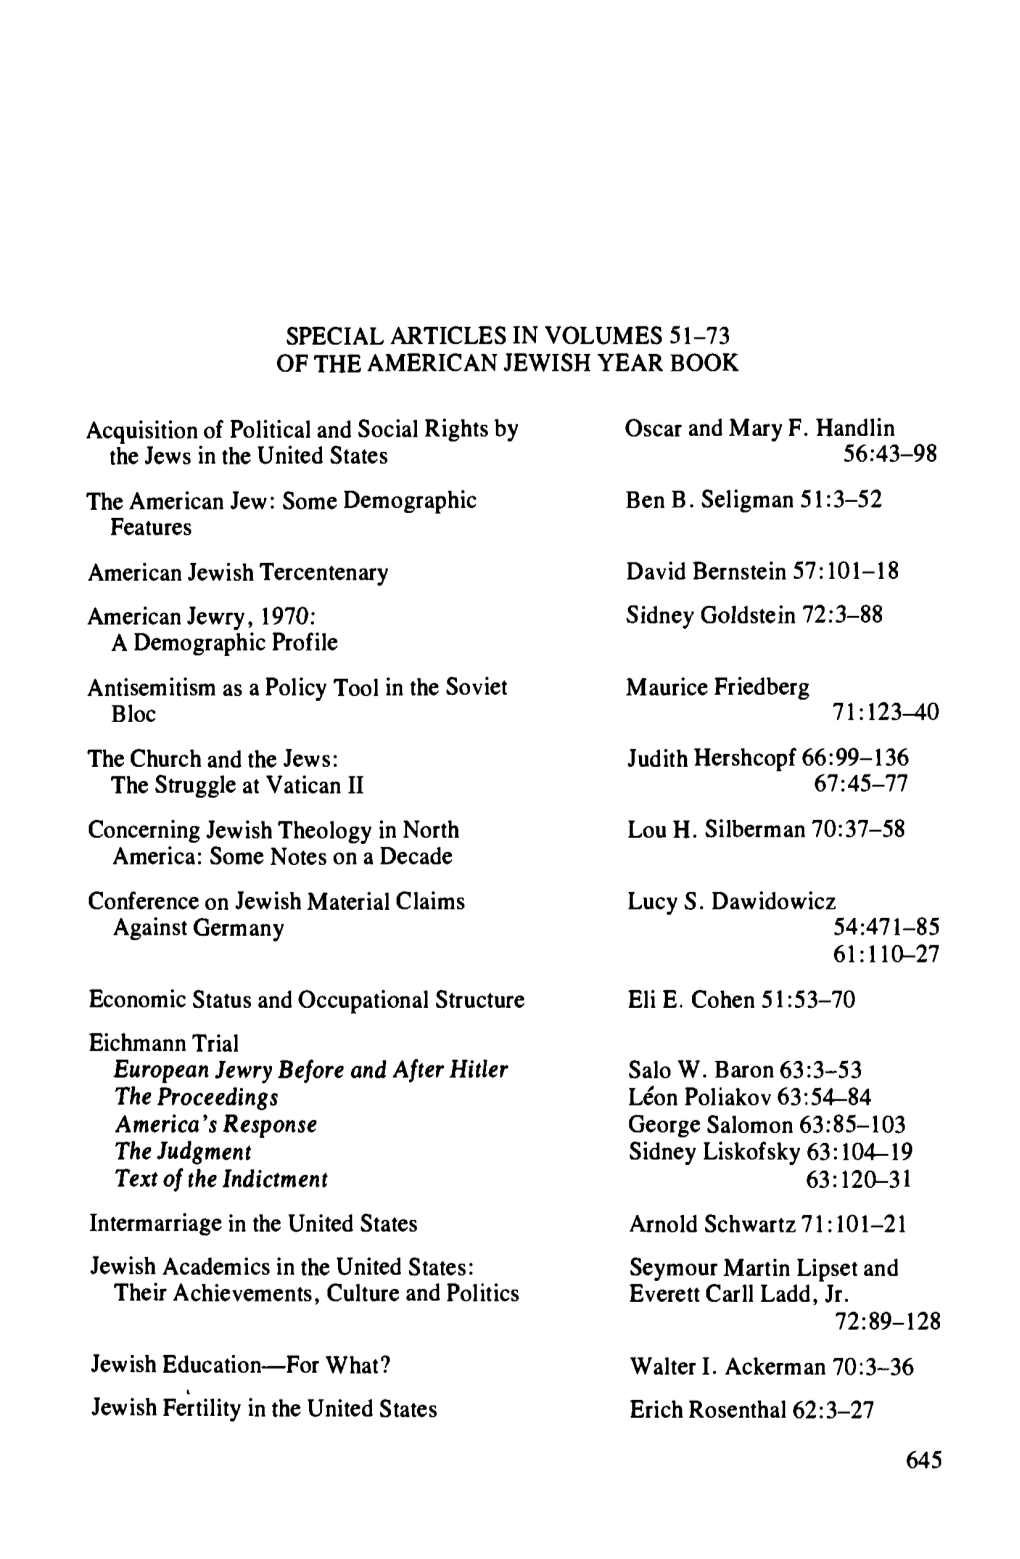 Special Articles in Volumes 51-73 of the American Jewish Year Book